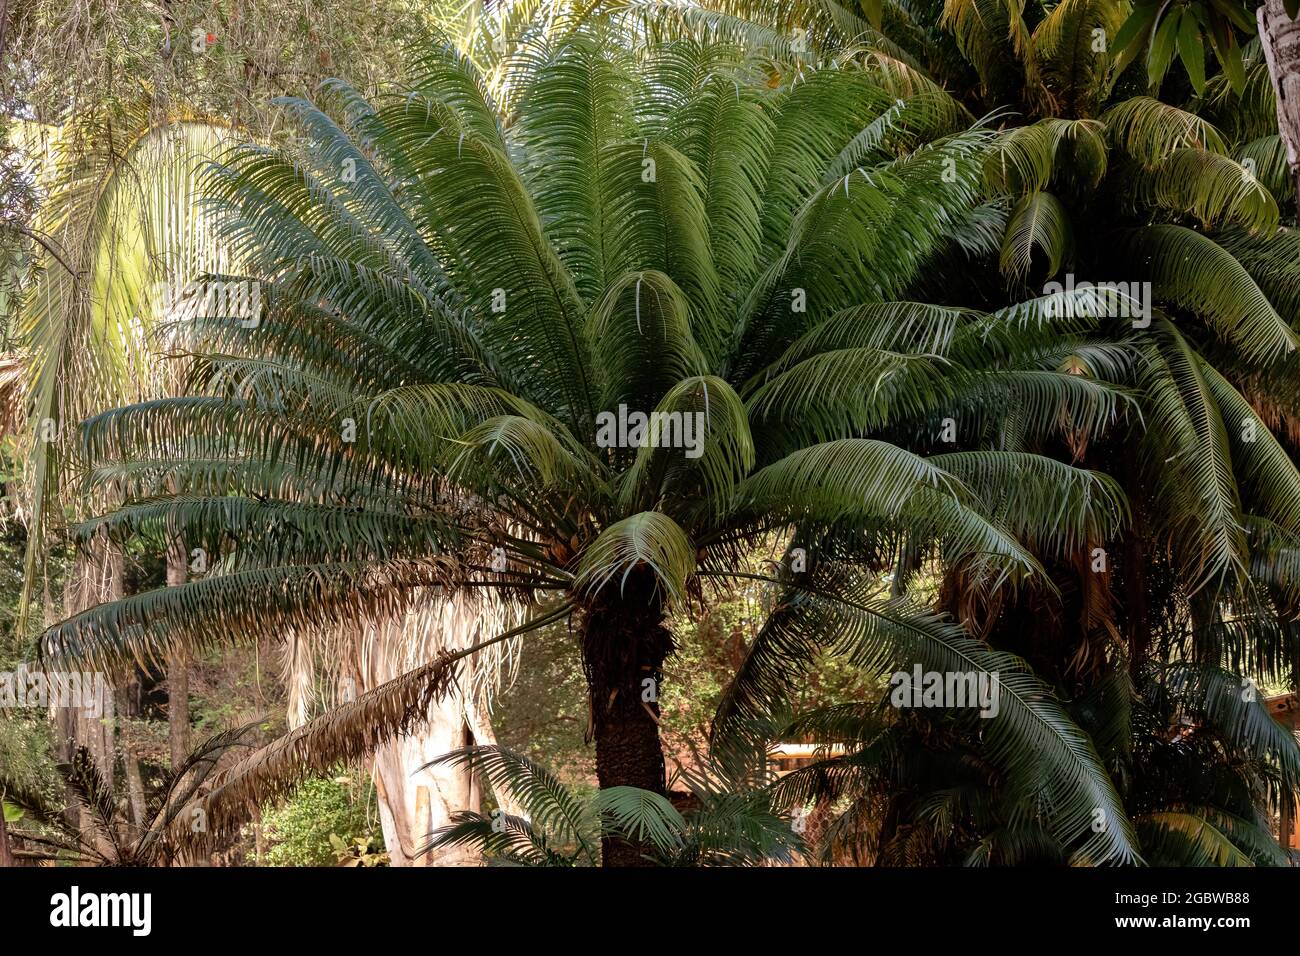 Cycad Plant Tree of the Order Cycadales Stock Photo